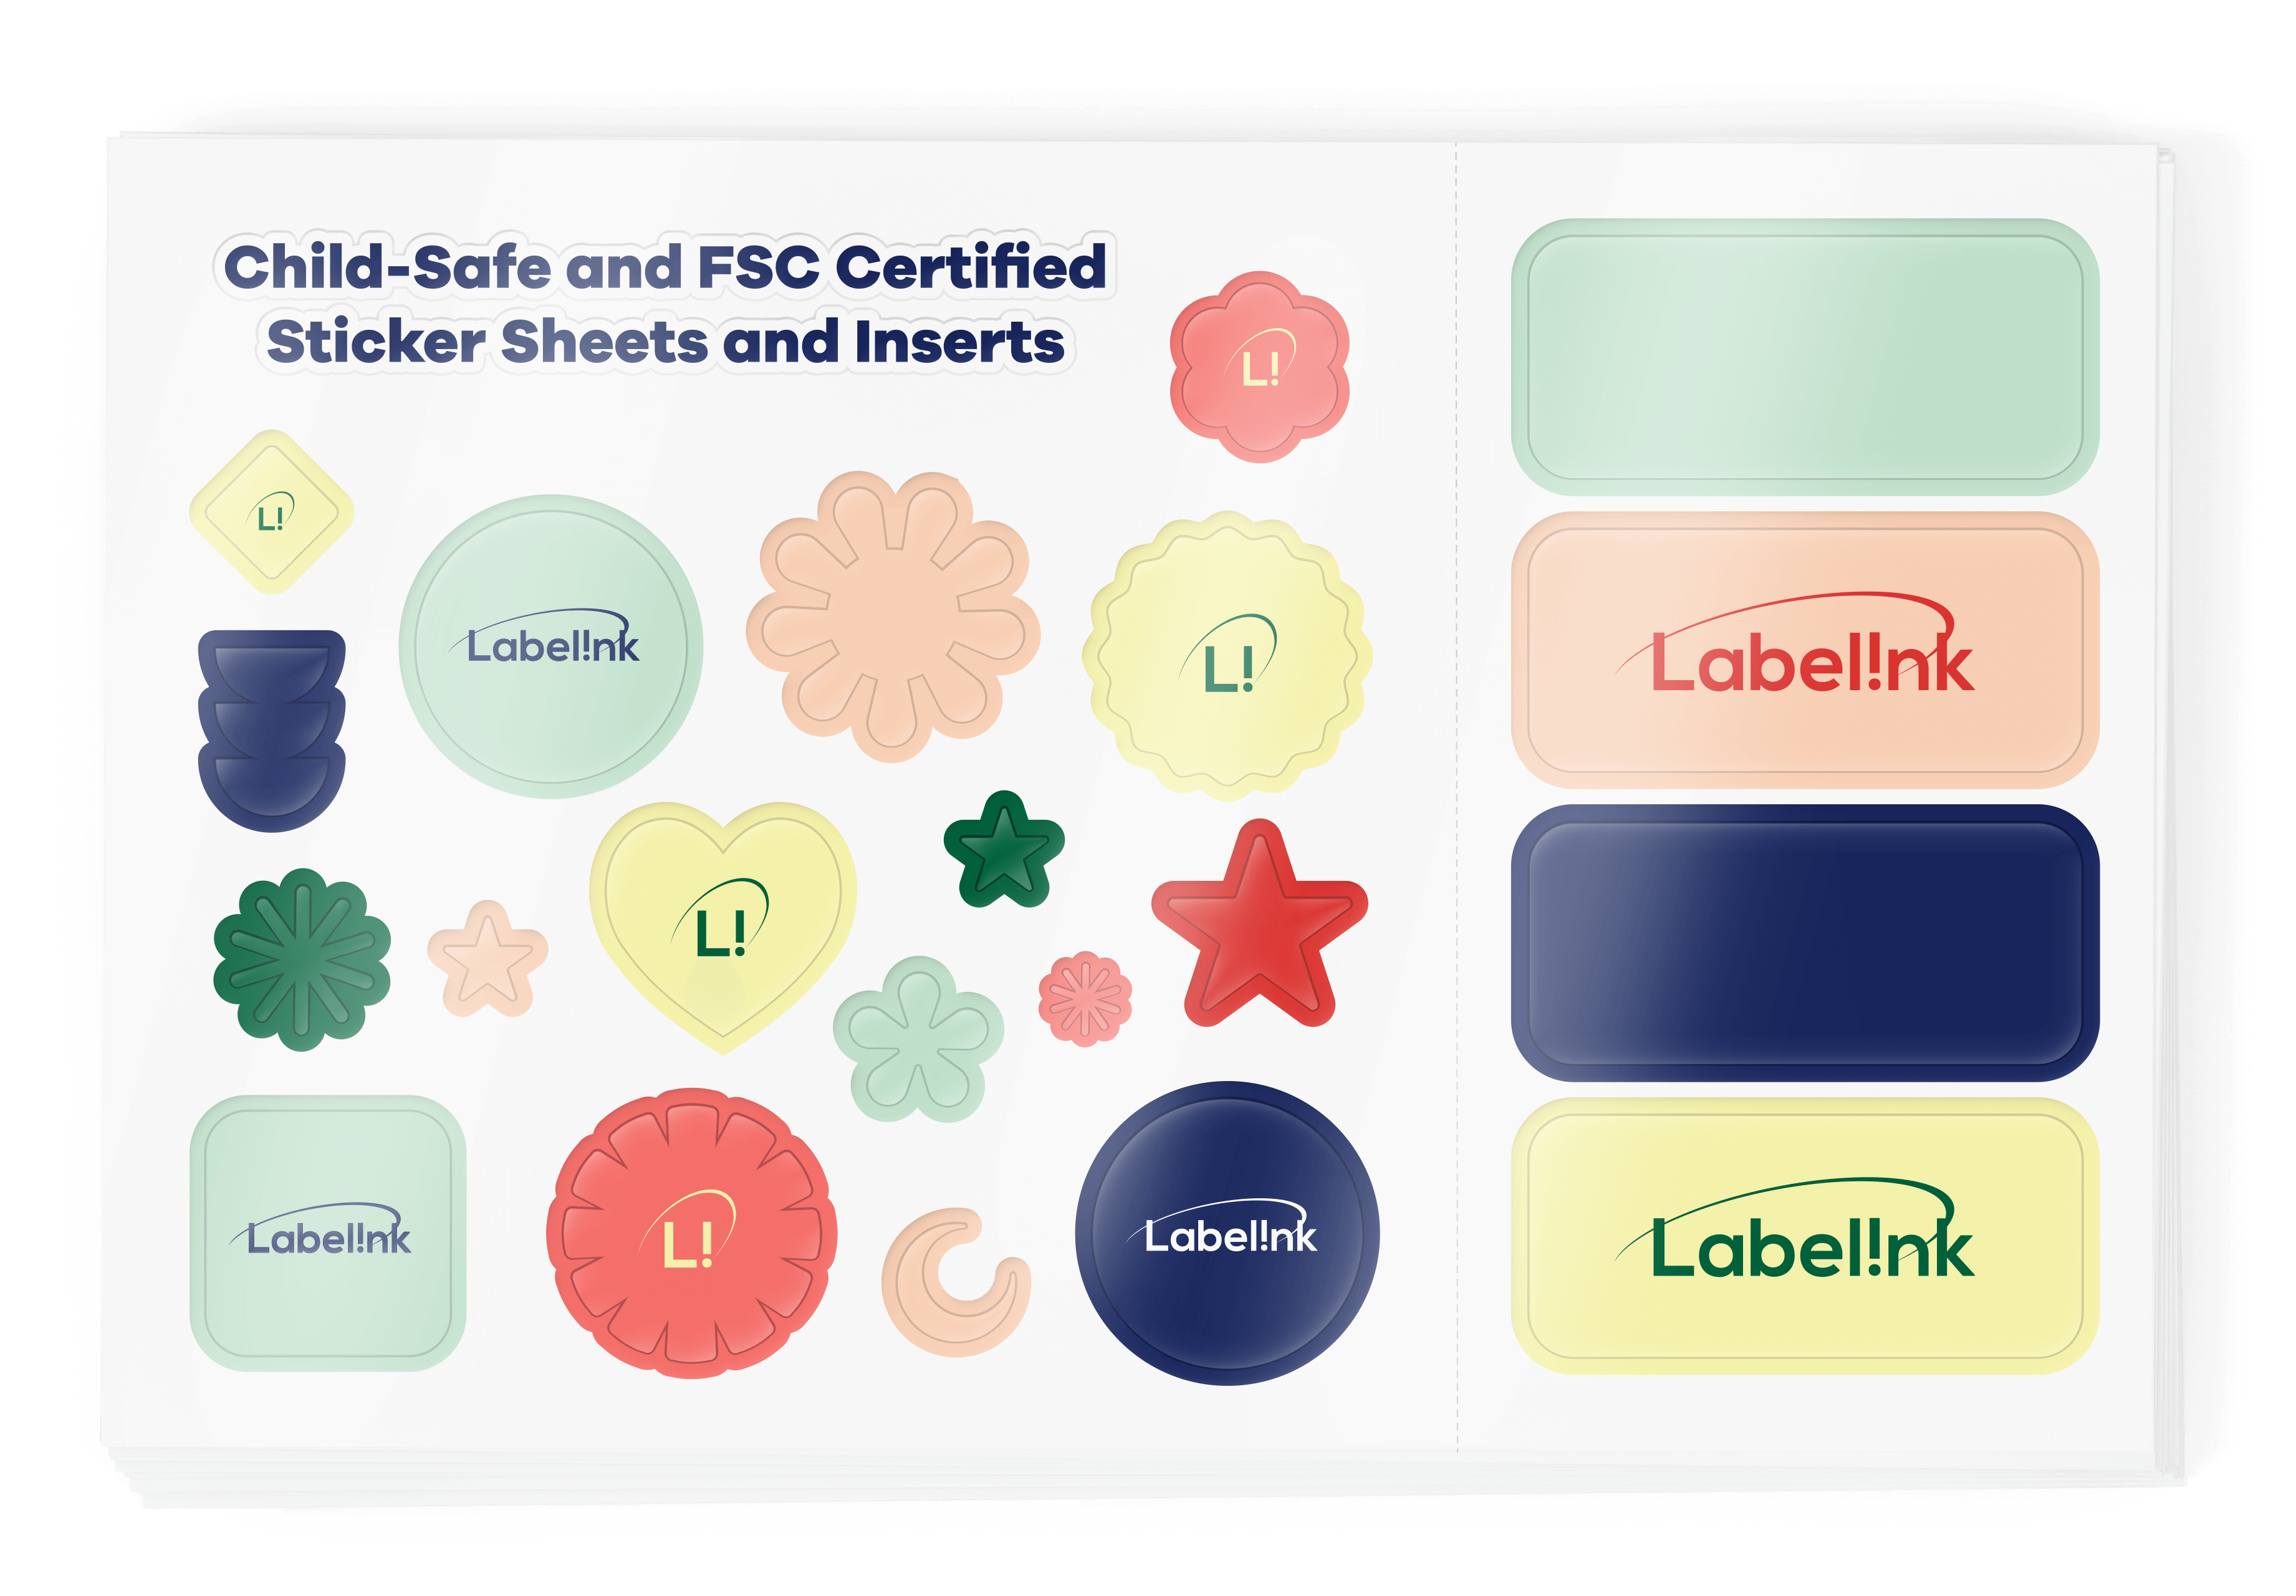 Child-Safe and FSC Certified Sticker Sheets and Inserts